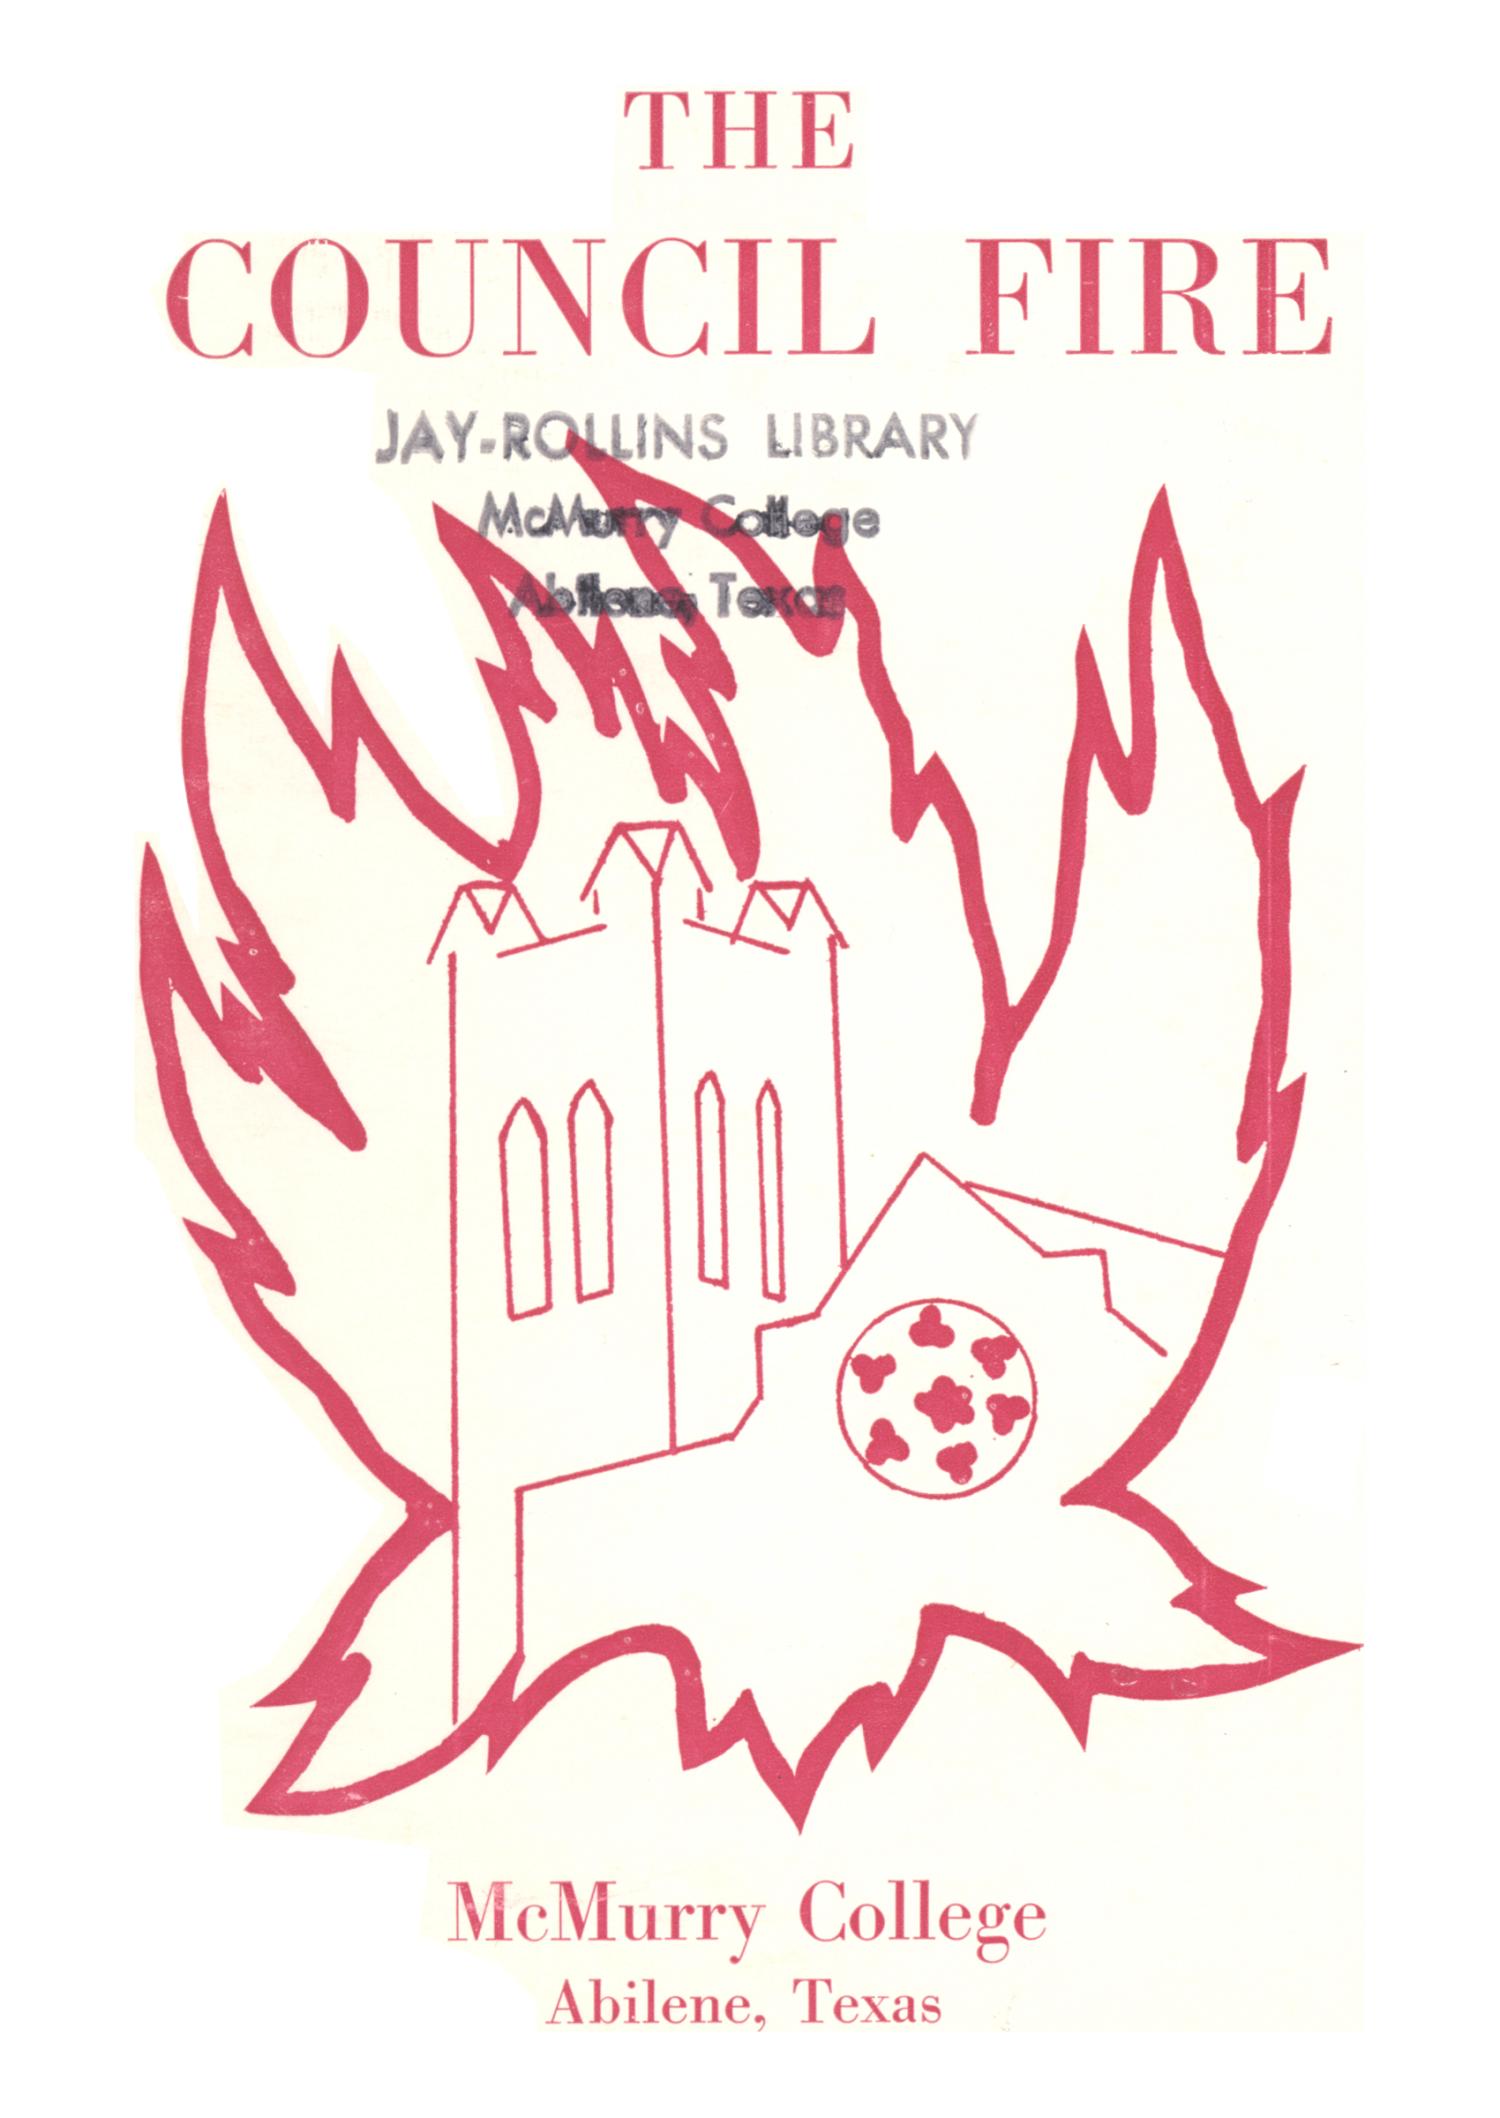 Council Fire, Handbook of McMurry College, [1964]
                                                
                                                    Front Cover
                                                